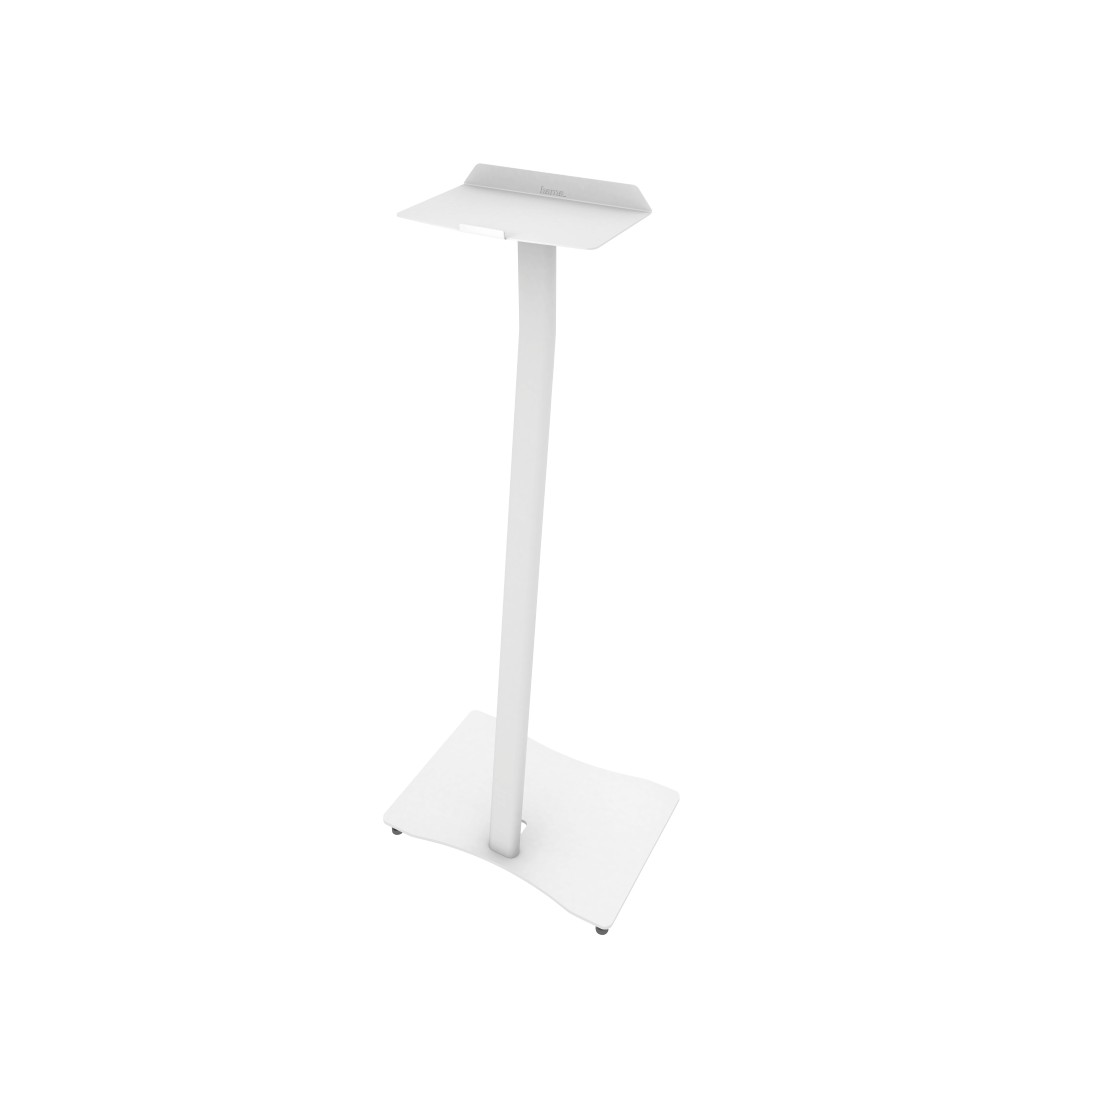 00118012 Hama Speaker Stand for Sonos PLAY:5, 2nd generation, white